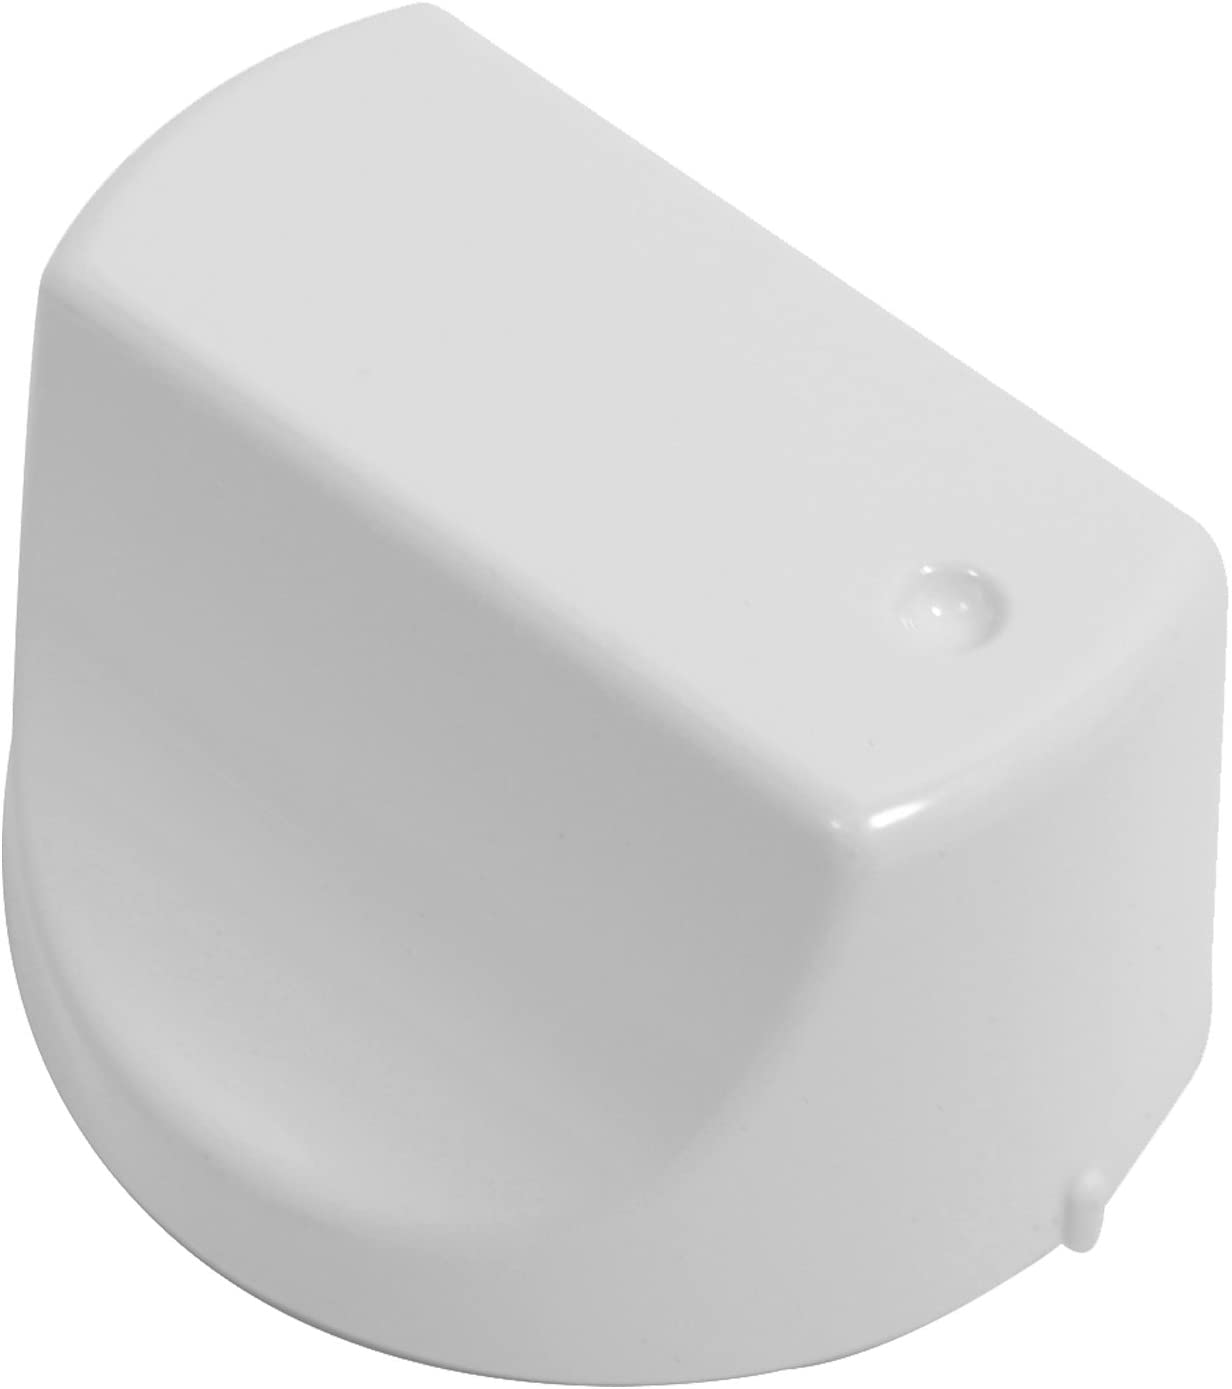 Control Knob Switch for HOTPOINT Oven Cooker White (Pack of 6)